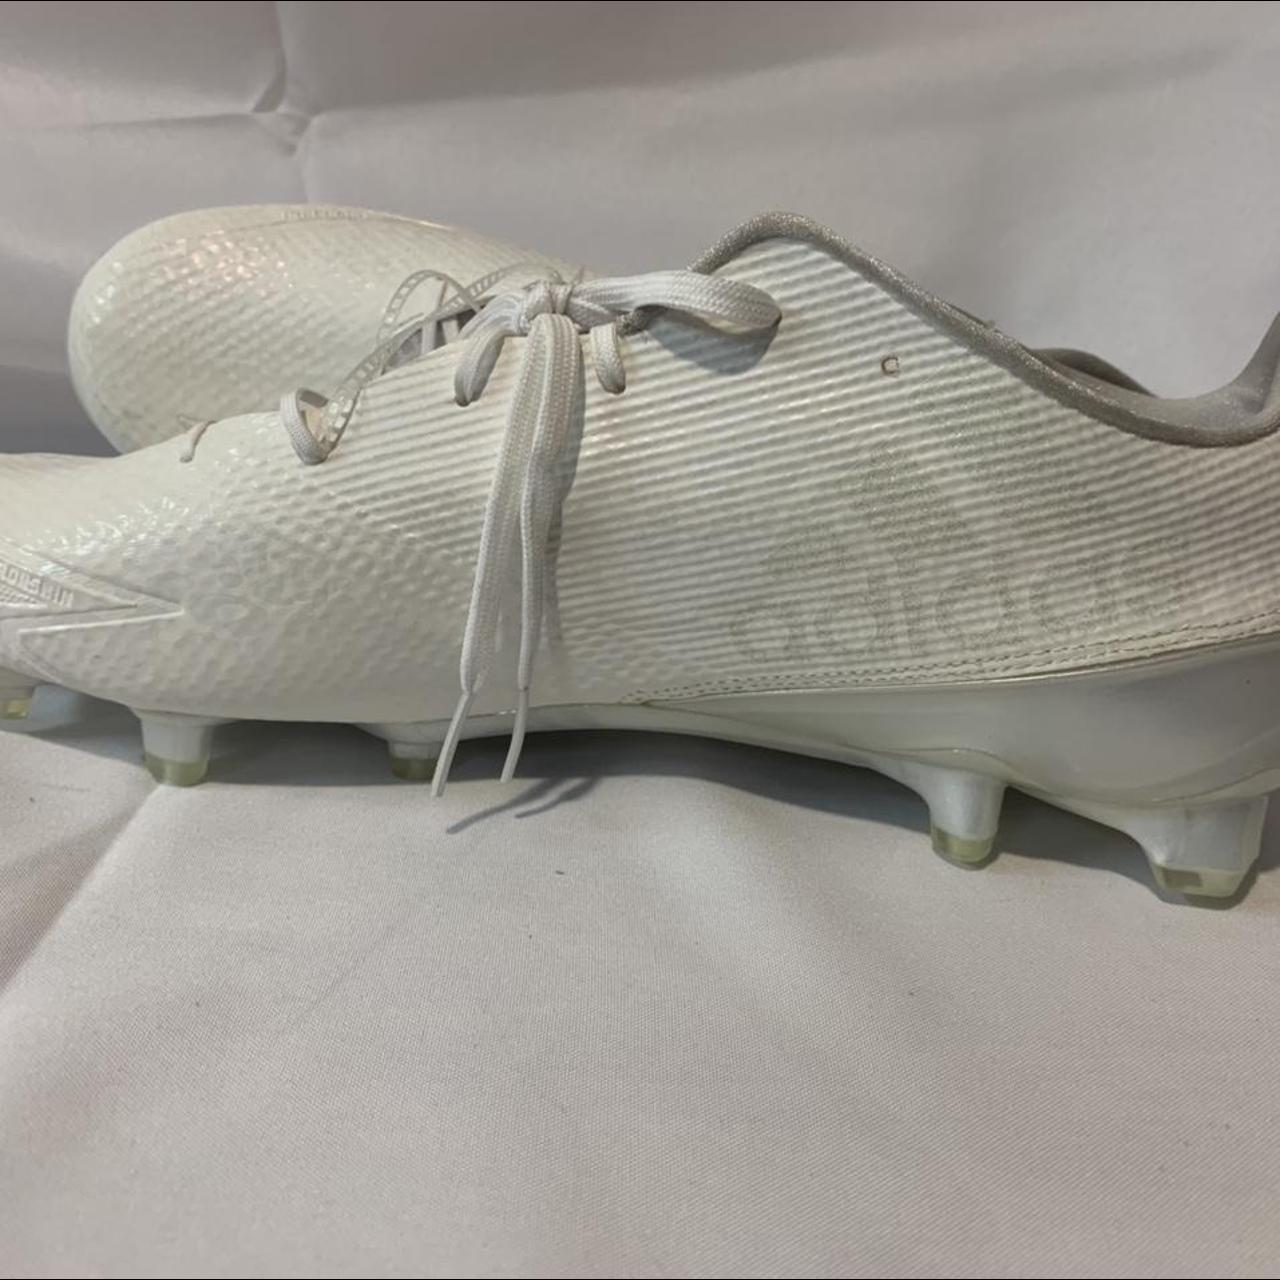 Adidas Men's White and Silver Boots